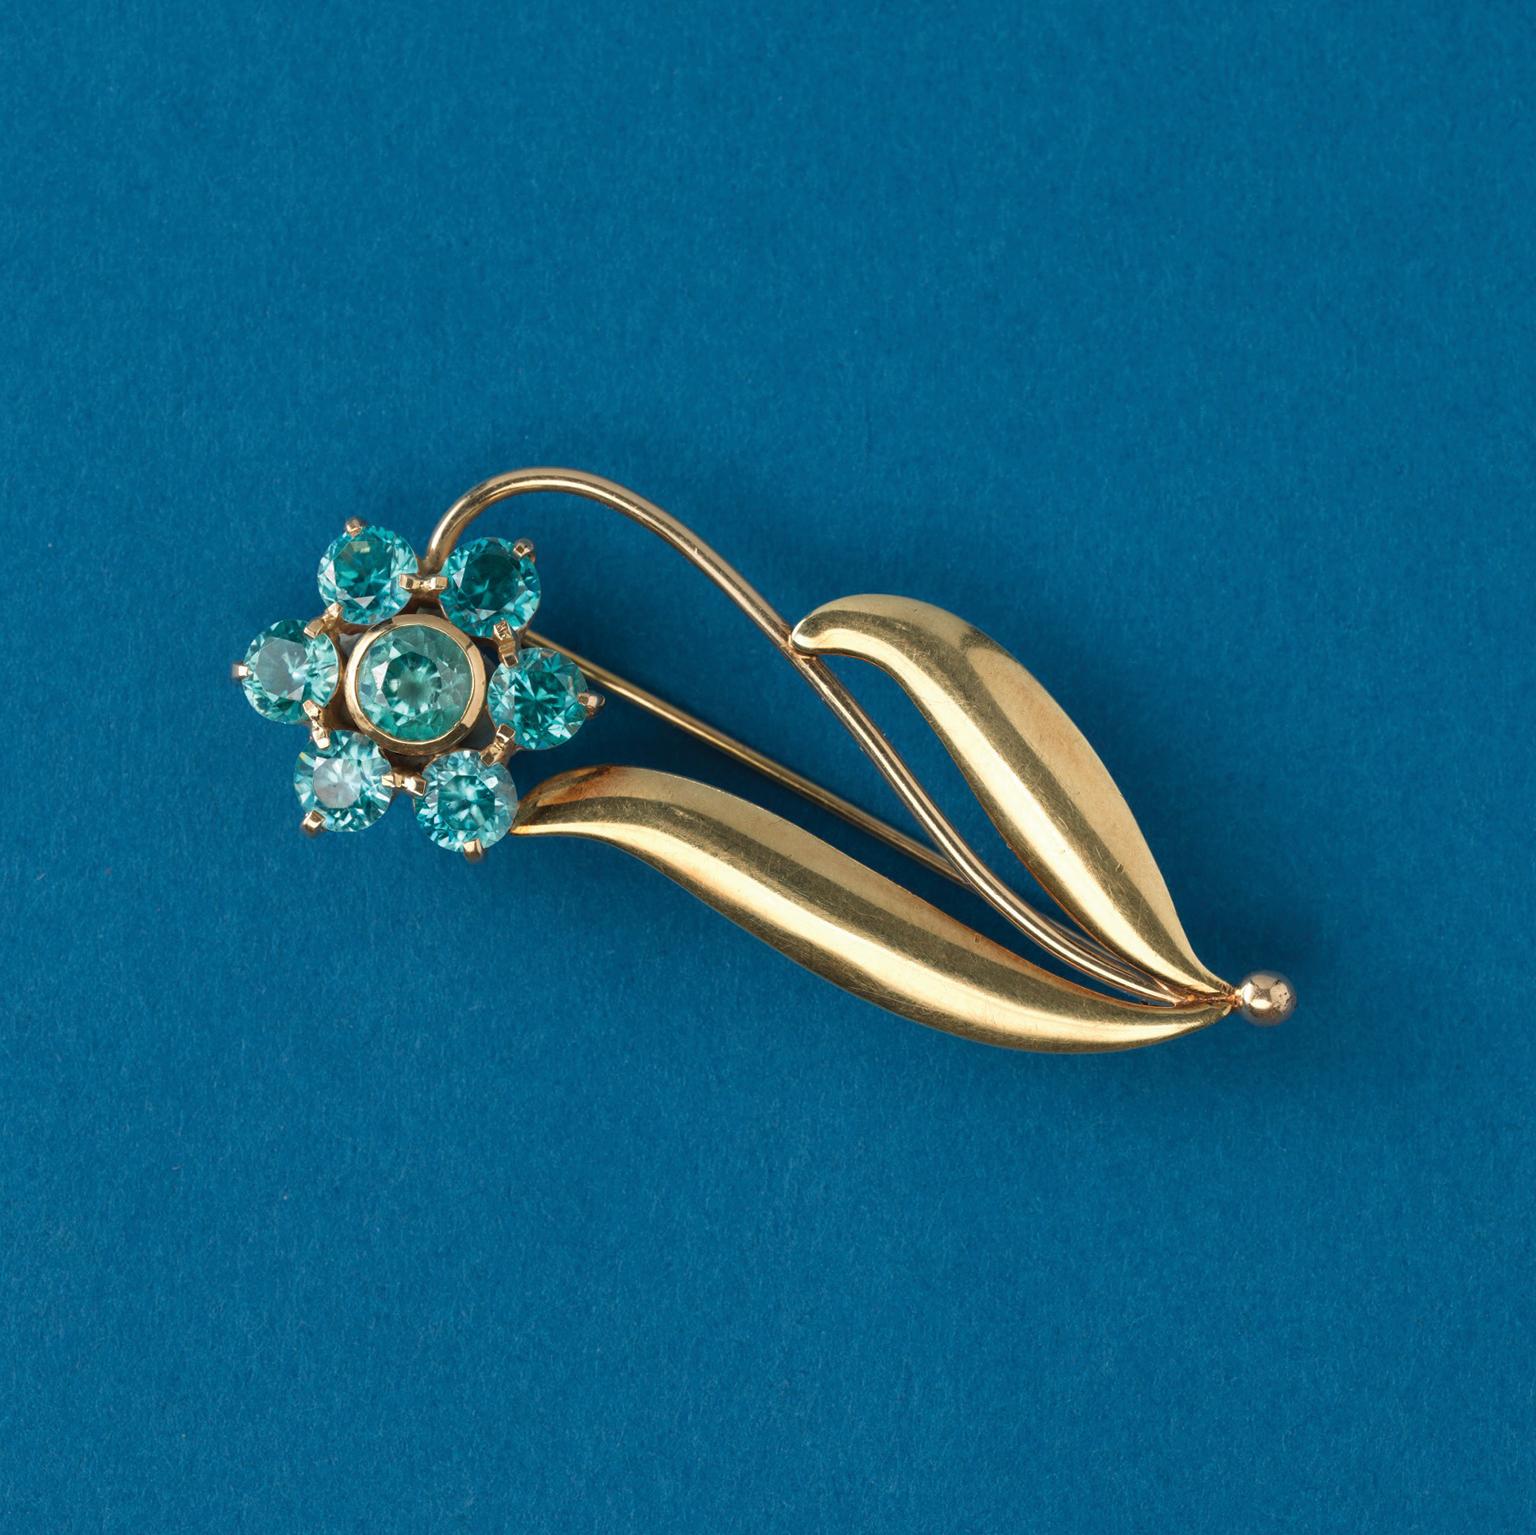 A 14 carat gold flower brooch set with 7 round, bright blue zircons, signed WAB, Wordley, Allsopp & Bliss American, circa 1945.

weight: 6.29 gram
dimensions: 5.8 x 2.3 cm